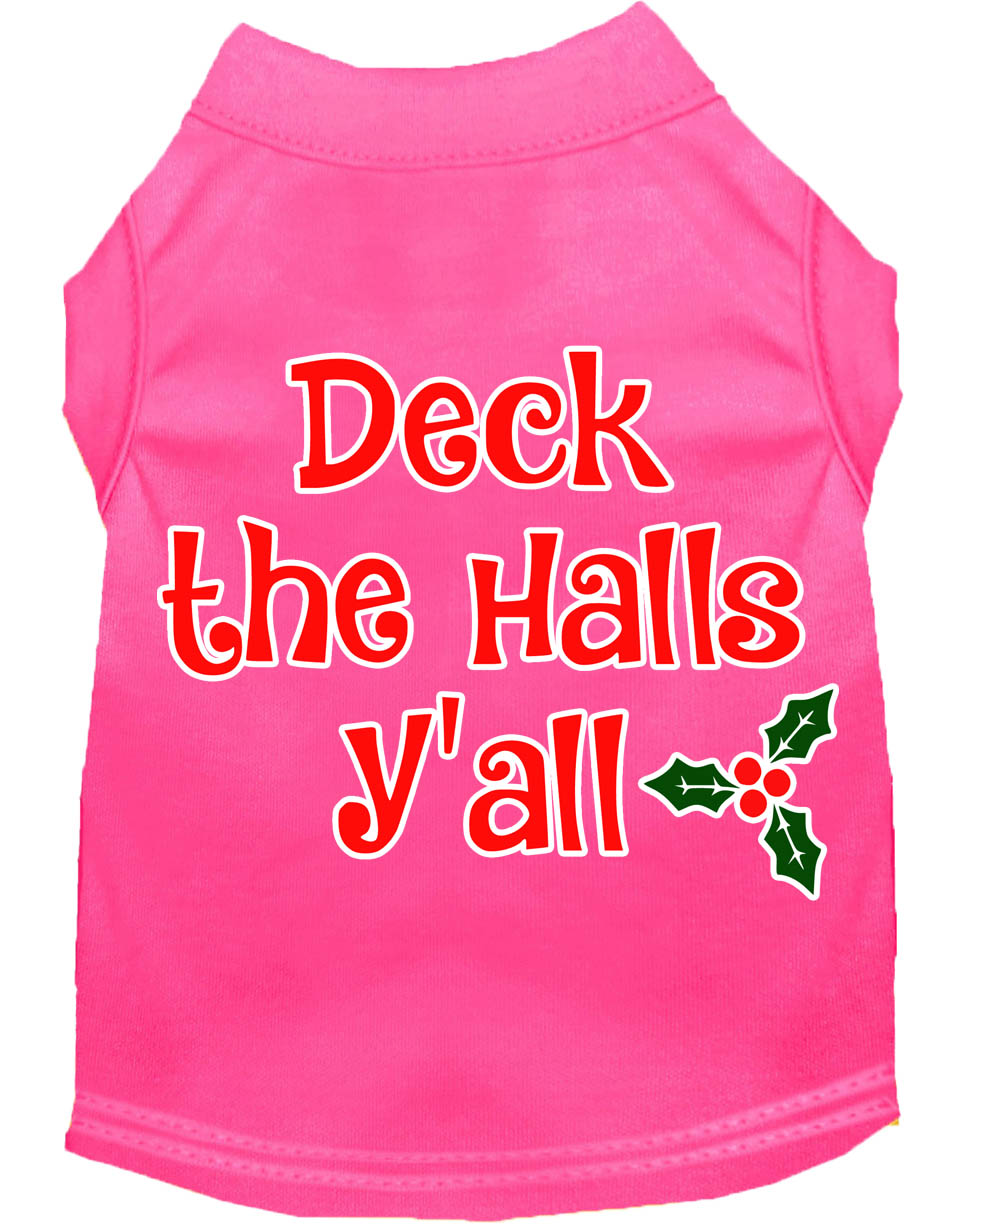 Deck the Halls Y'all Screen Print Dog Shirt Bright Pink Med